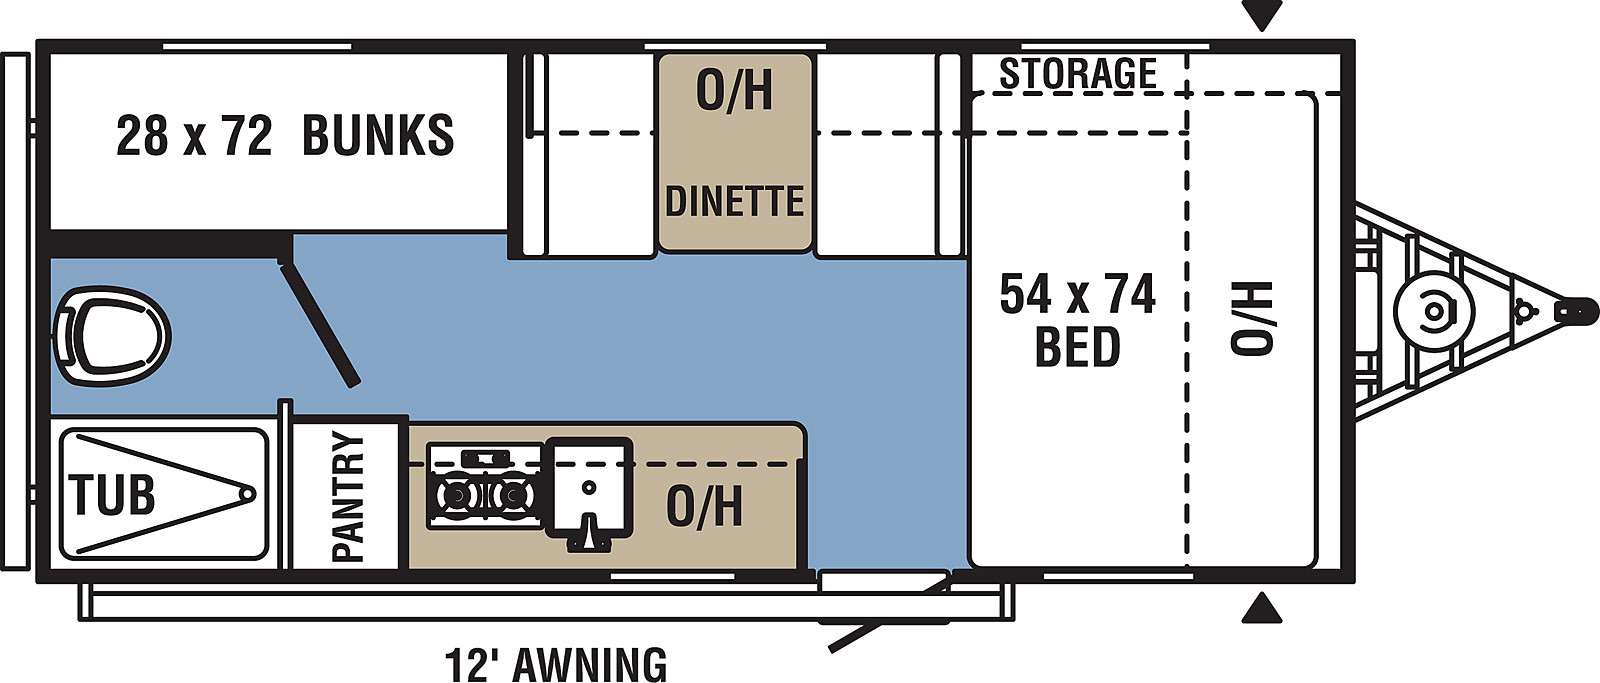 Clipper Ultra-Lite 17BH floorplan. The 17BH has no slide outs and one entry door.